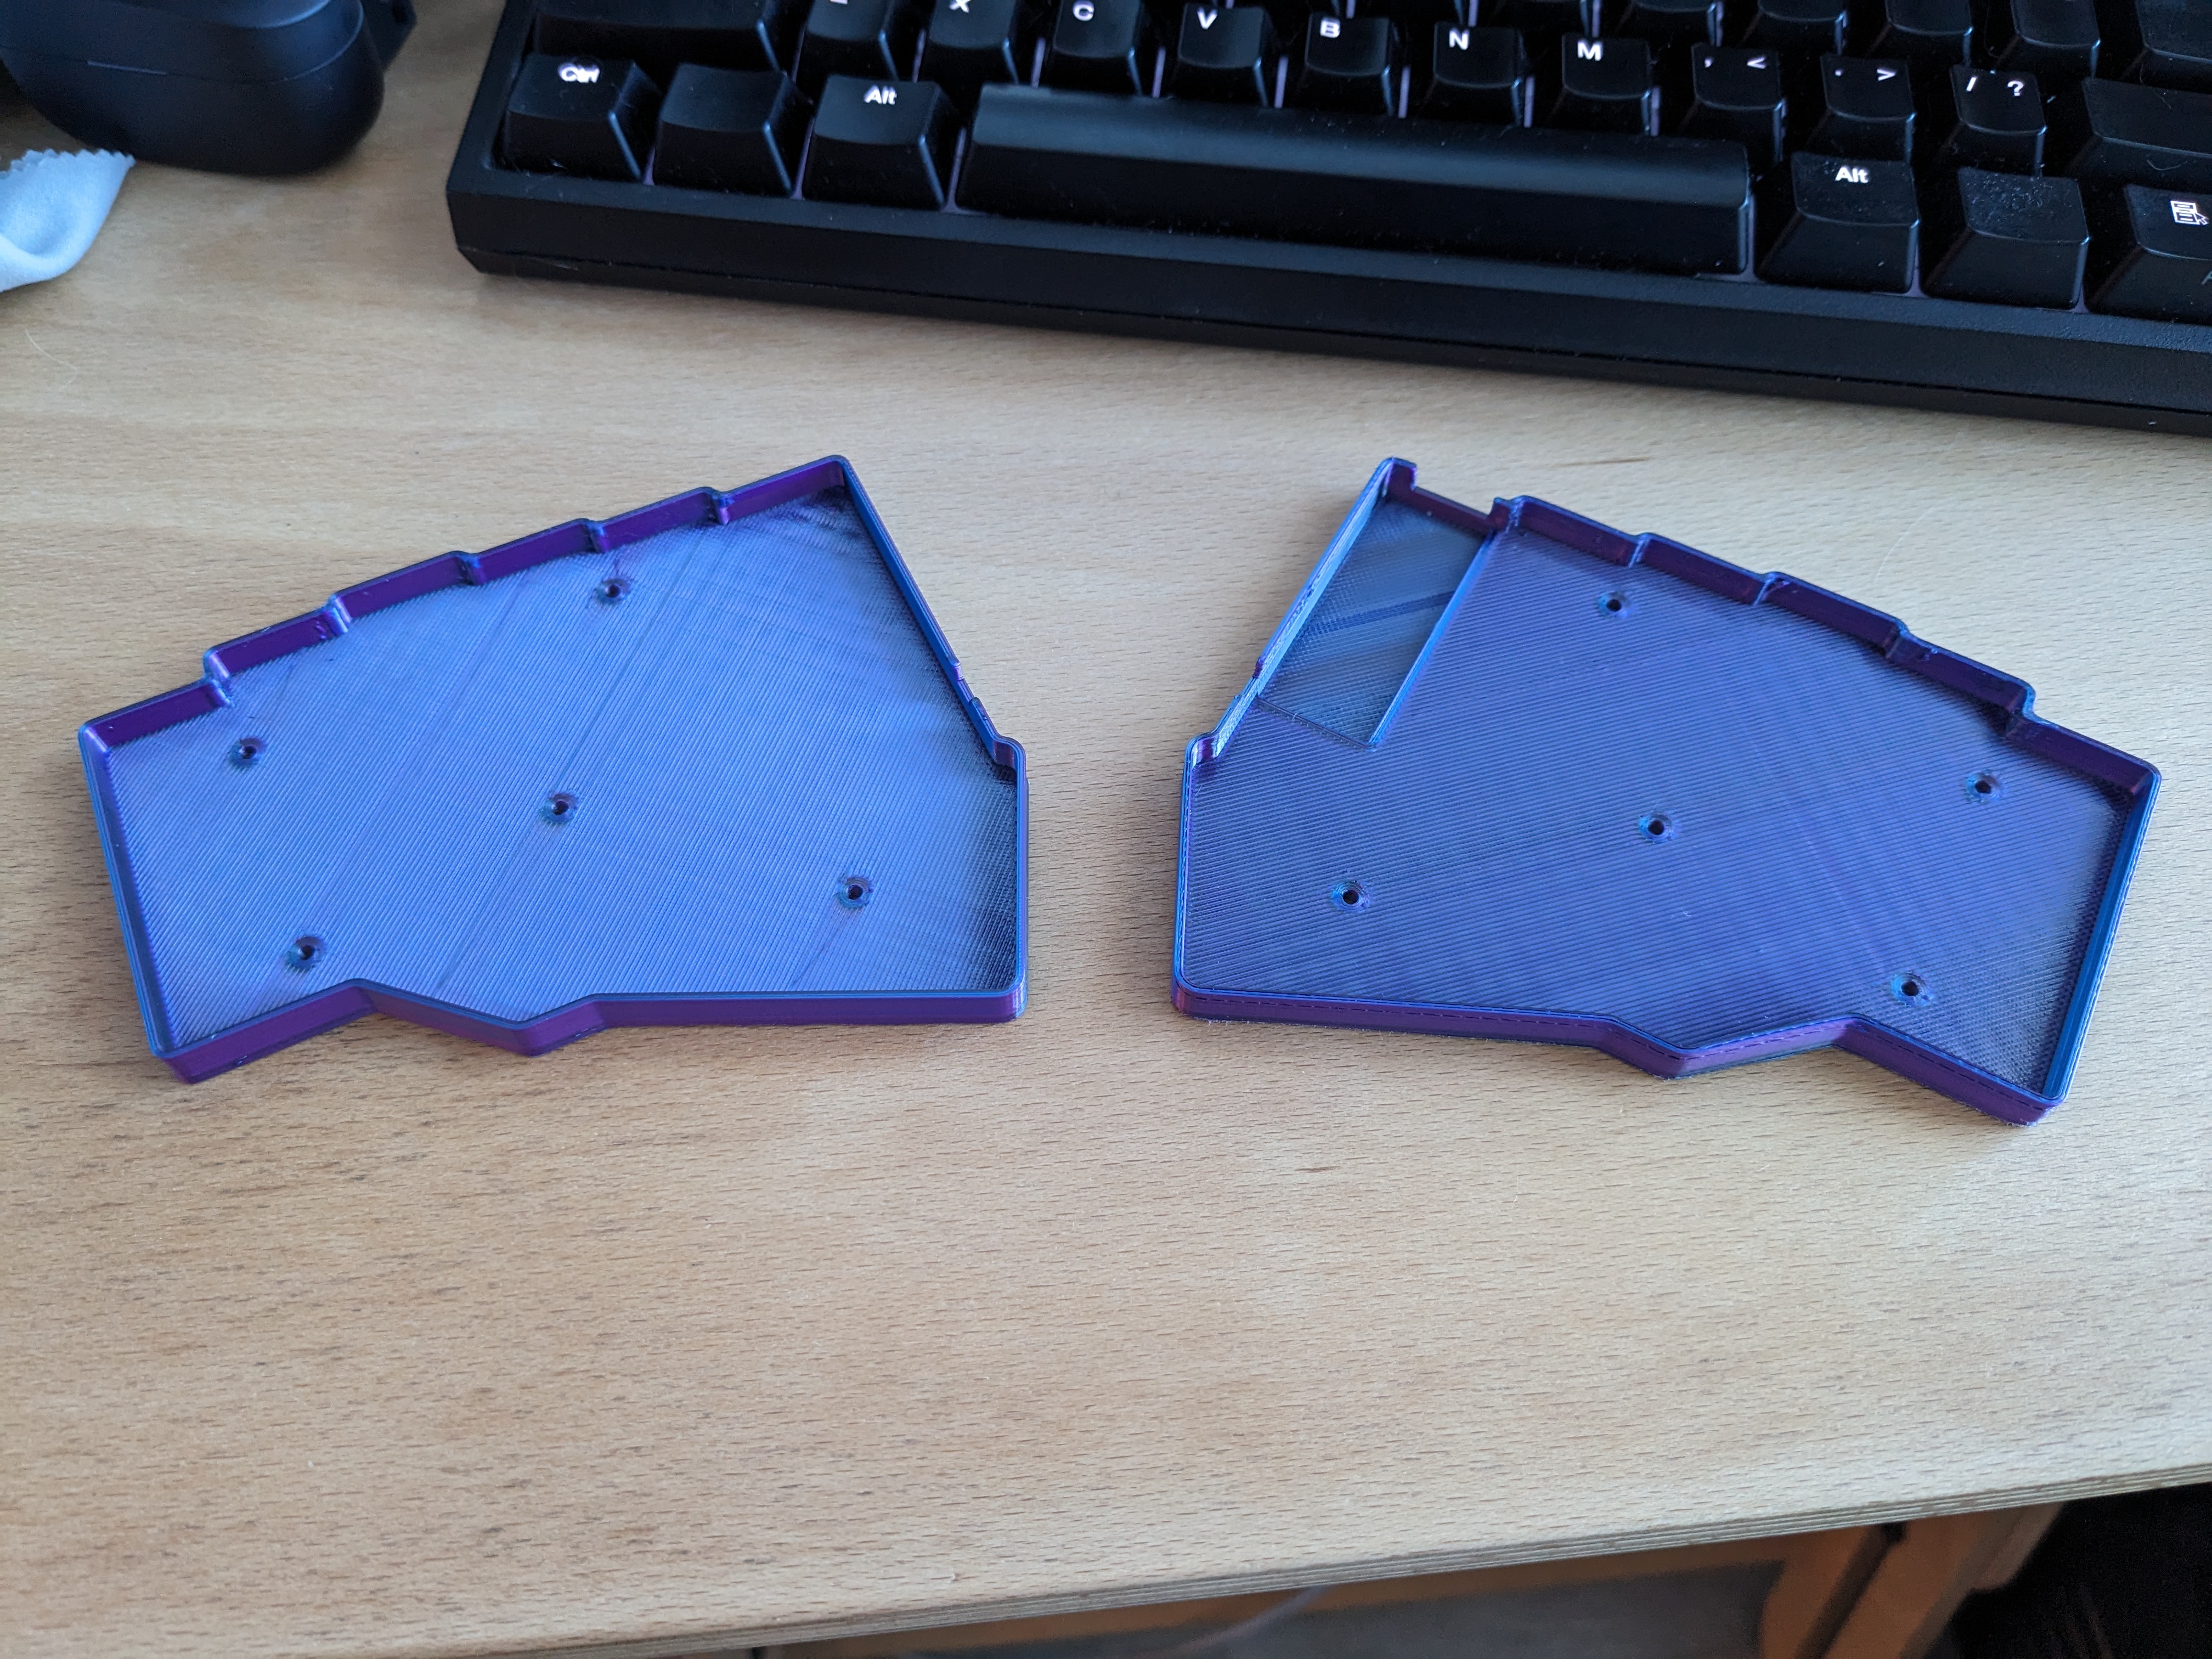 Two halves of an ergonomic split keyboard case, 3D-printed using a shiny blue, purple, and red filament